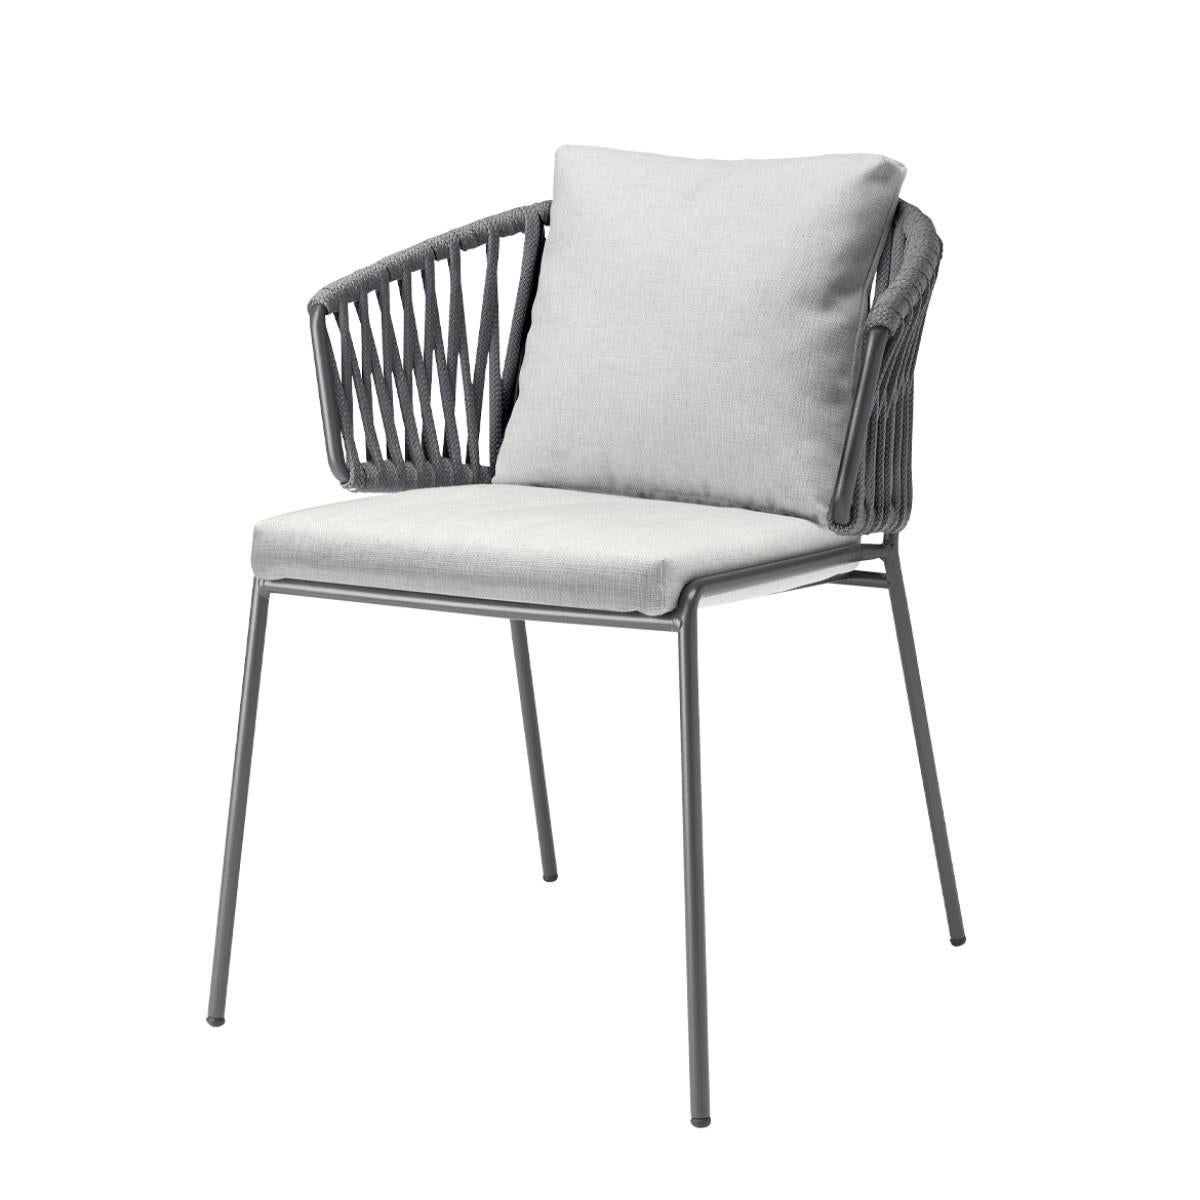 Modern Pair of Grey Outdoor or Indoor Metal and Cord Armchairs, 21 century For Sale